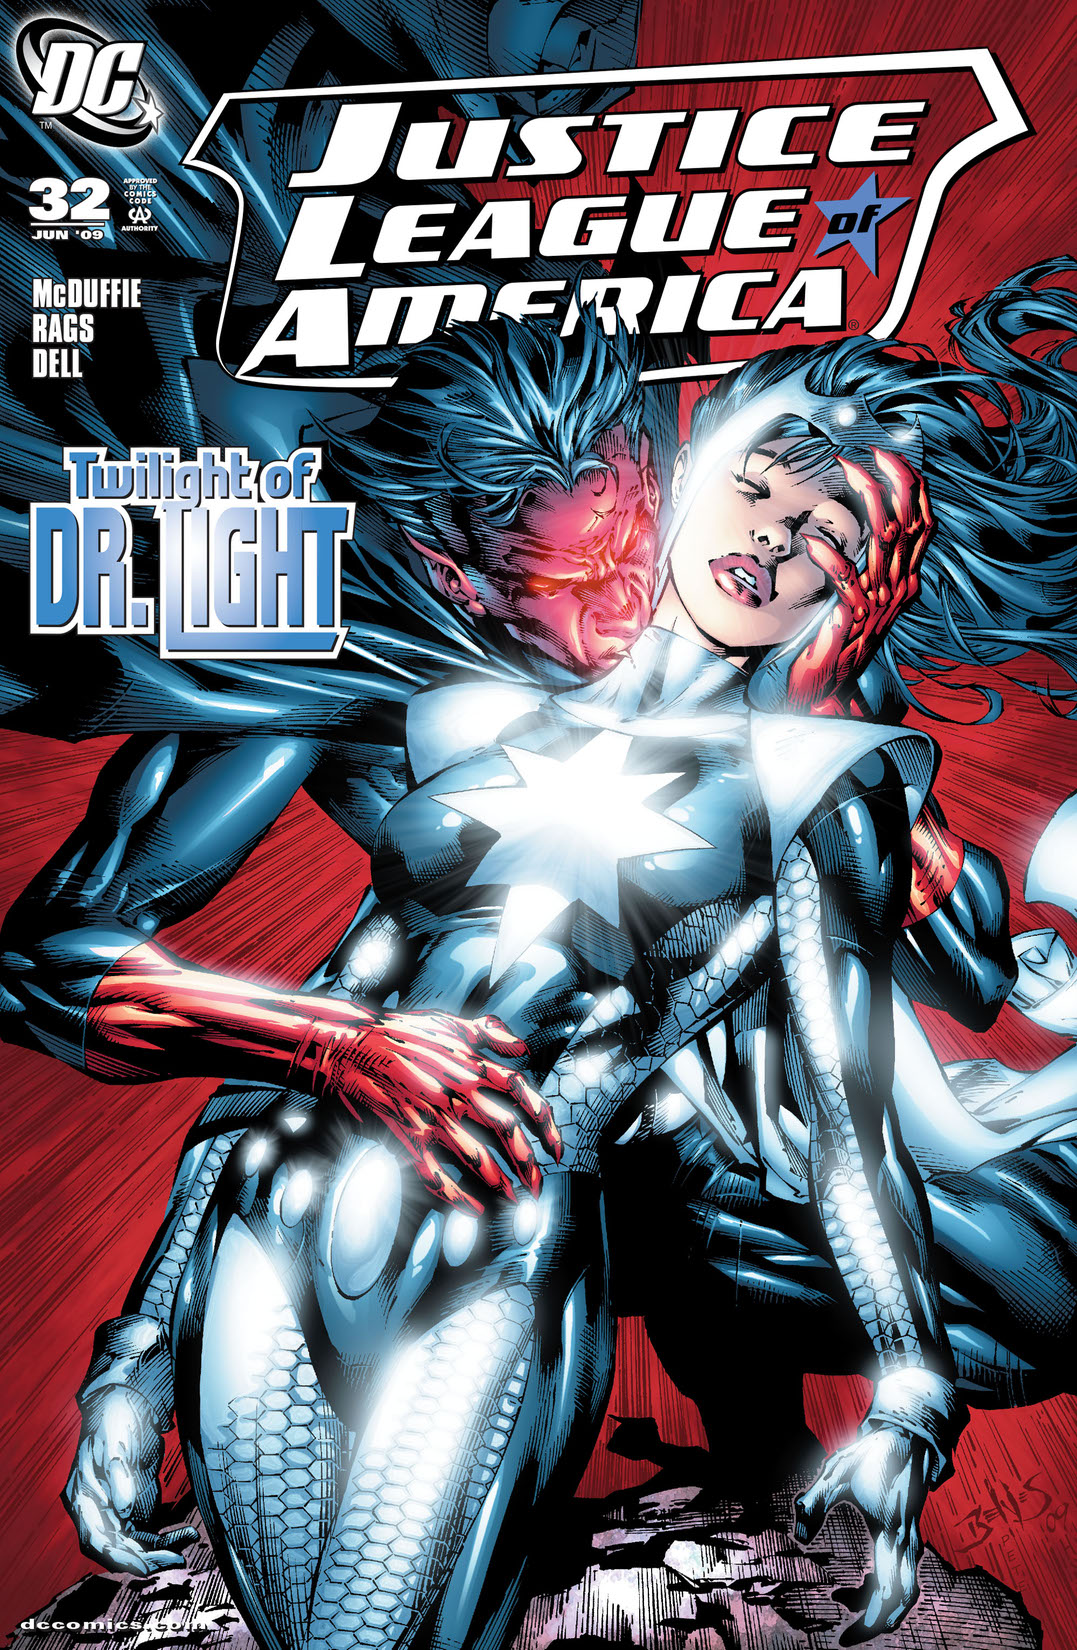 Justice League of America (2006-) #32 preview images